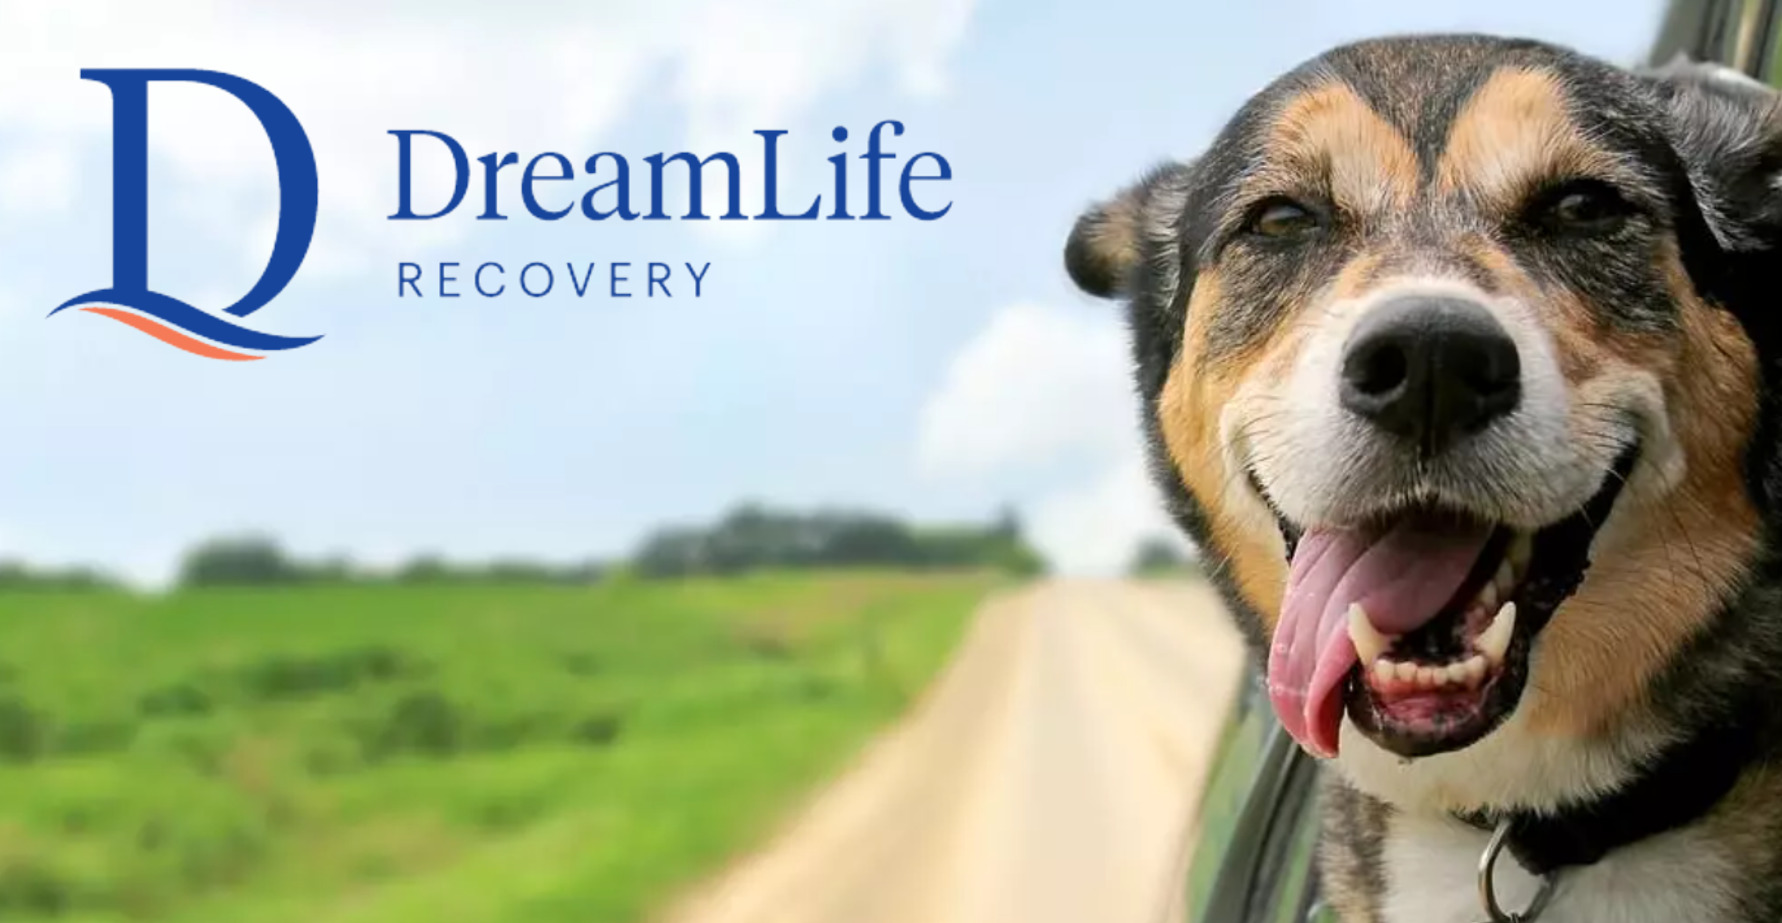 dreamlife logo and dog with head out car window driving on dirt road